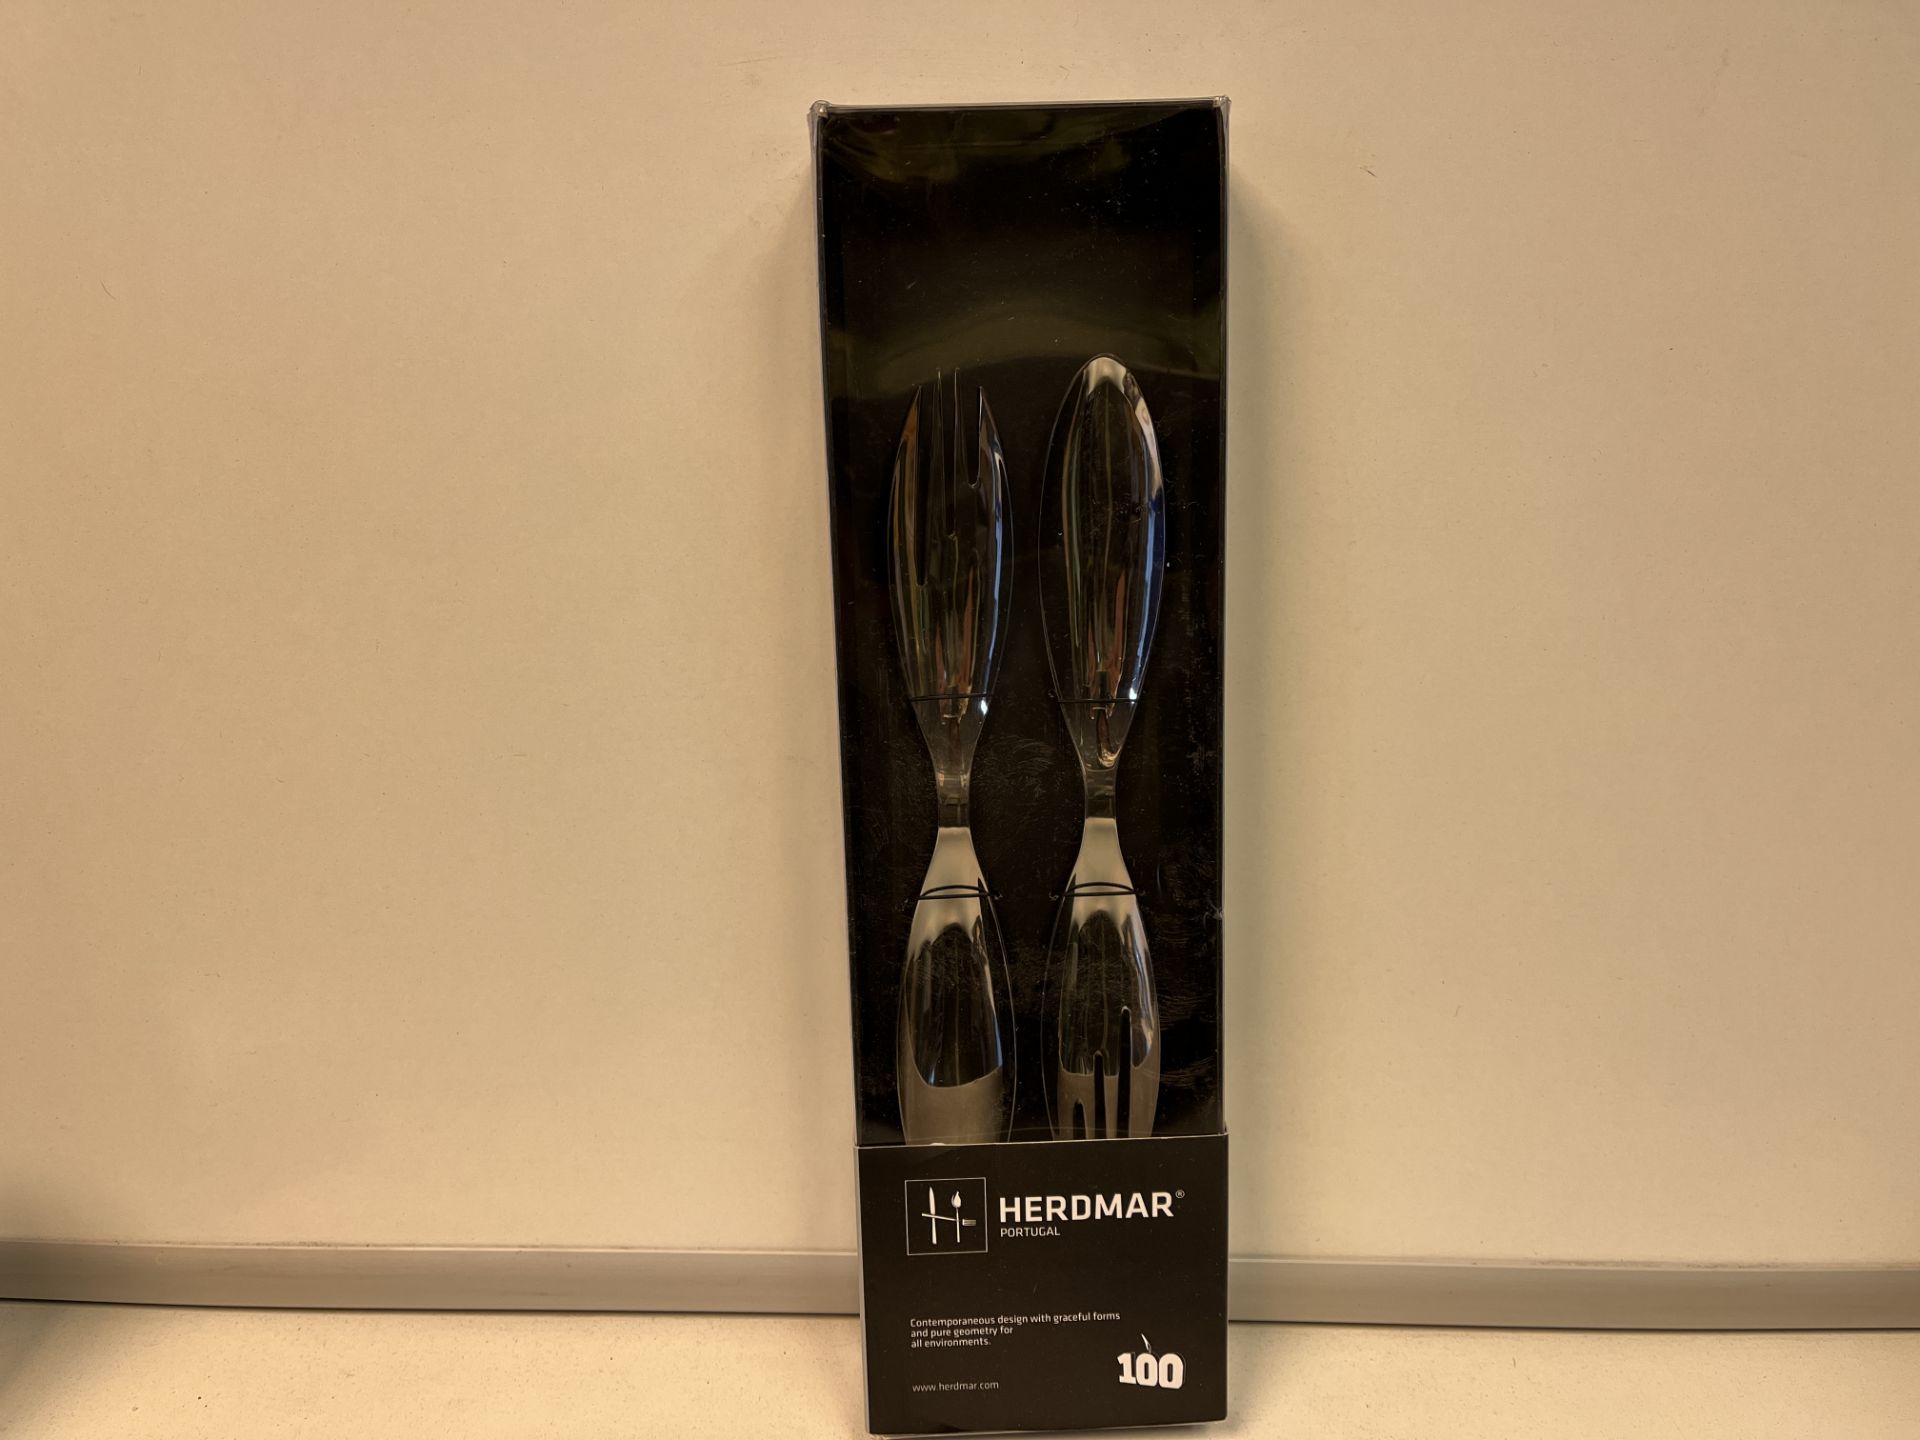 40 x NEW PRESENTATION BOXED. HERDMAR PORTUGAL SET OF 2 FORK & SPOONS. COMTEMPORANEOS DESIGN WITH